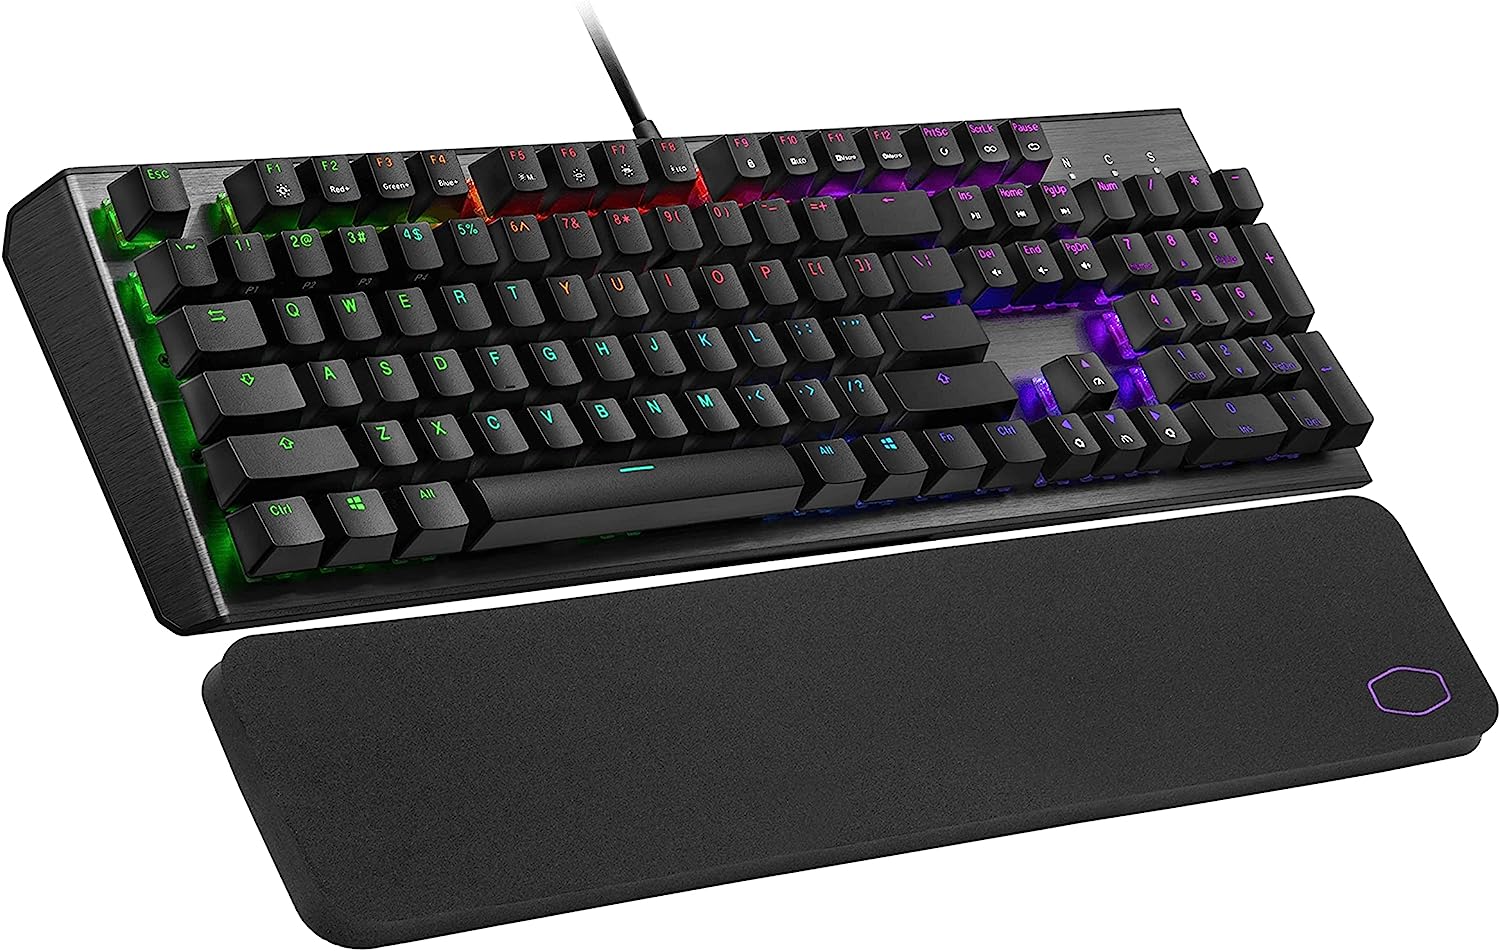 Cooler Master CK550 V2 Gaming Mechanical Keyboard Brown Switch with RGB Backlighting